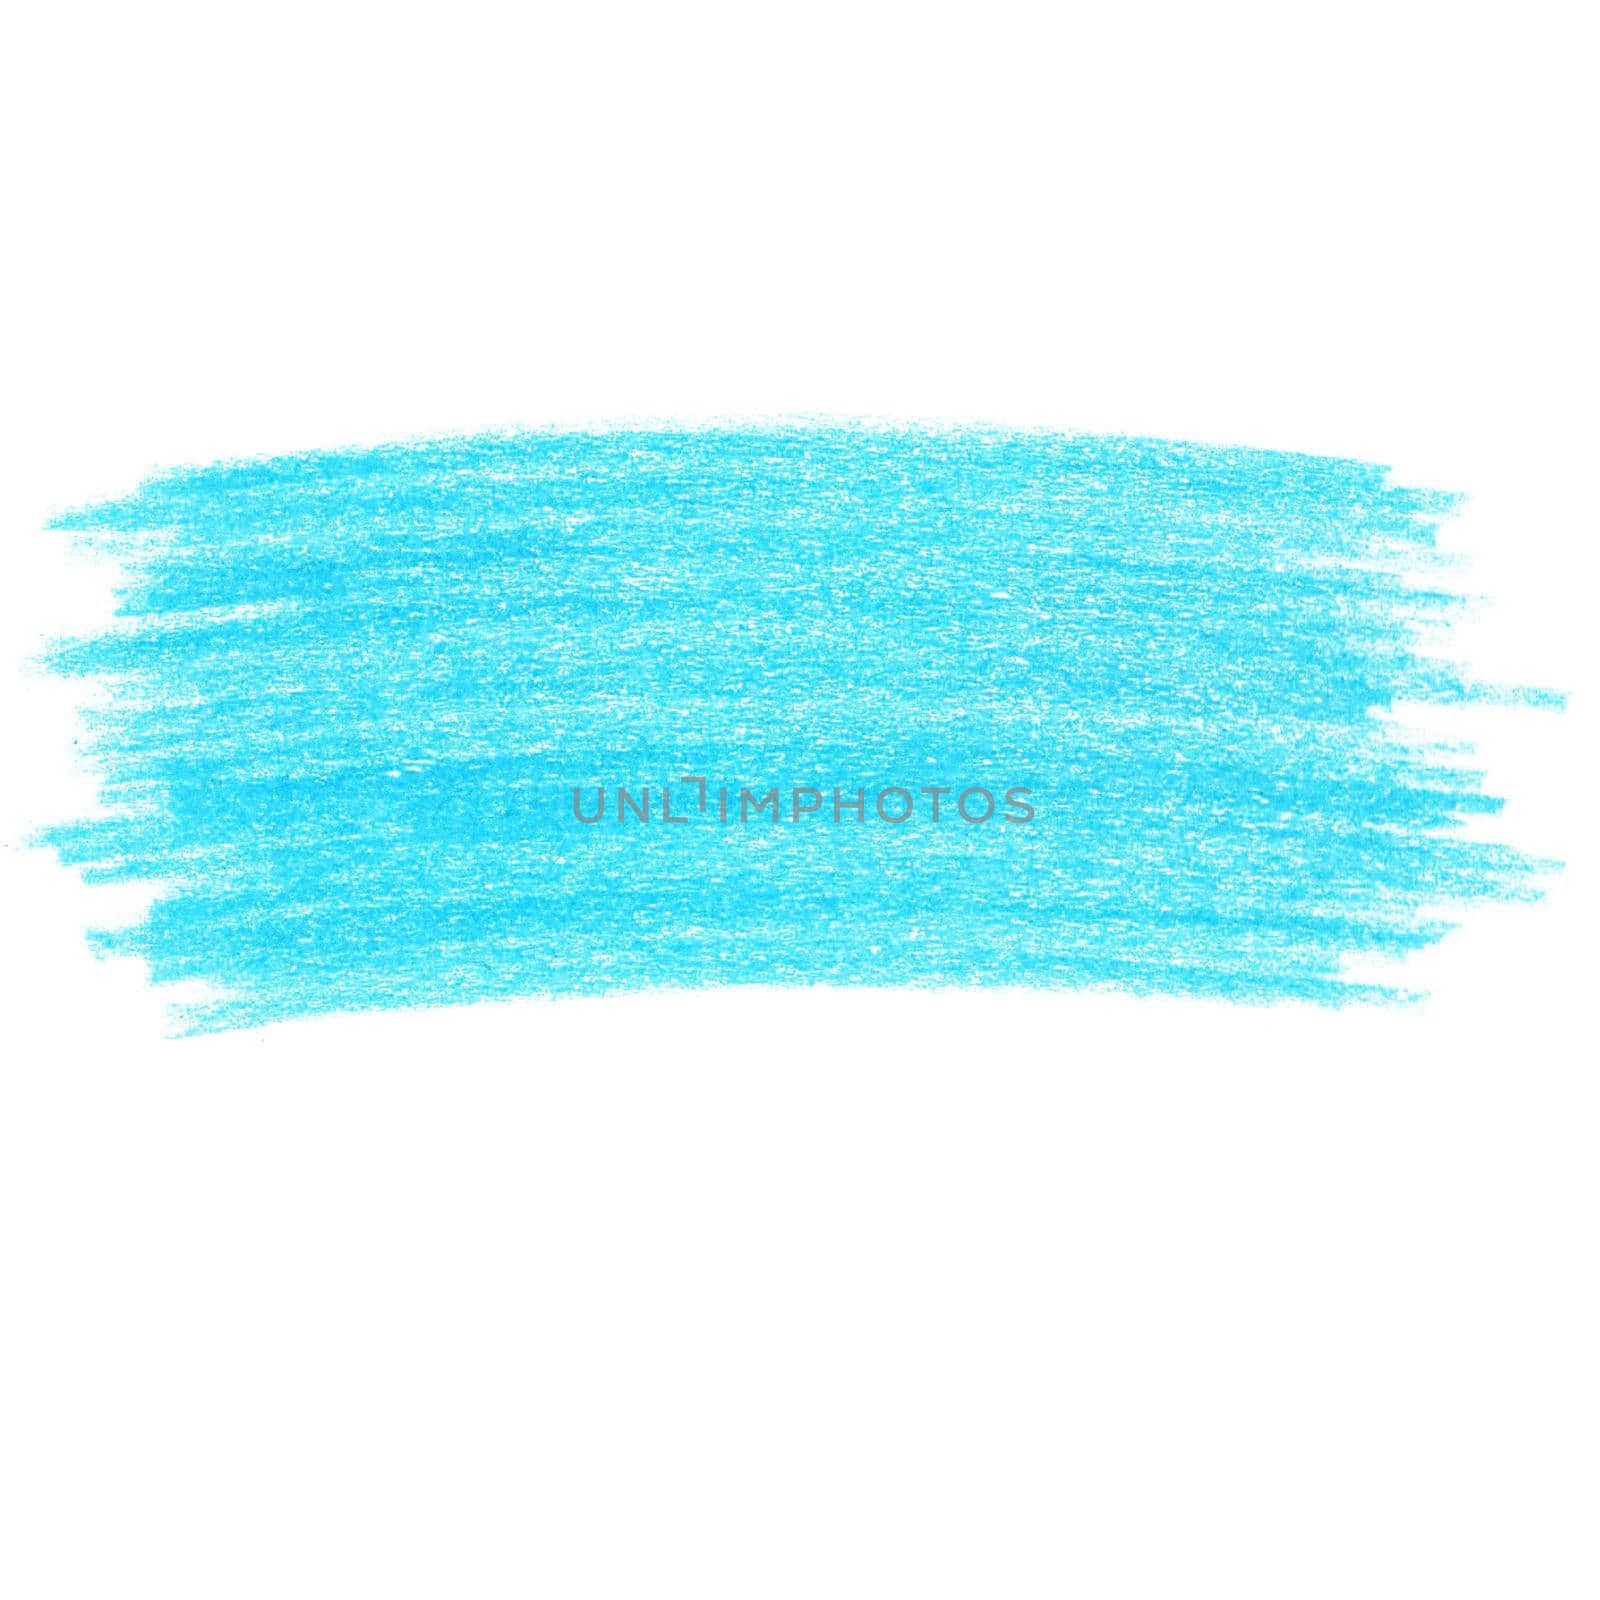 Hand Drawn Abstract Color Pencil Scribble Abstract Illustration Isolated on White Background.